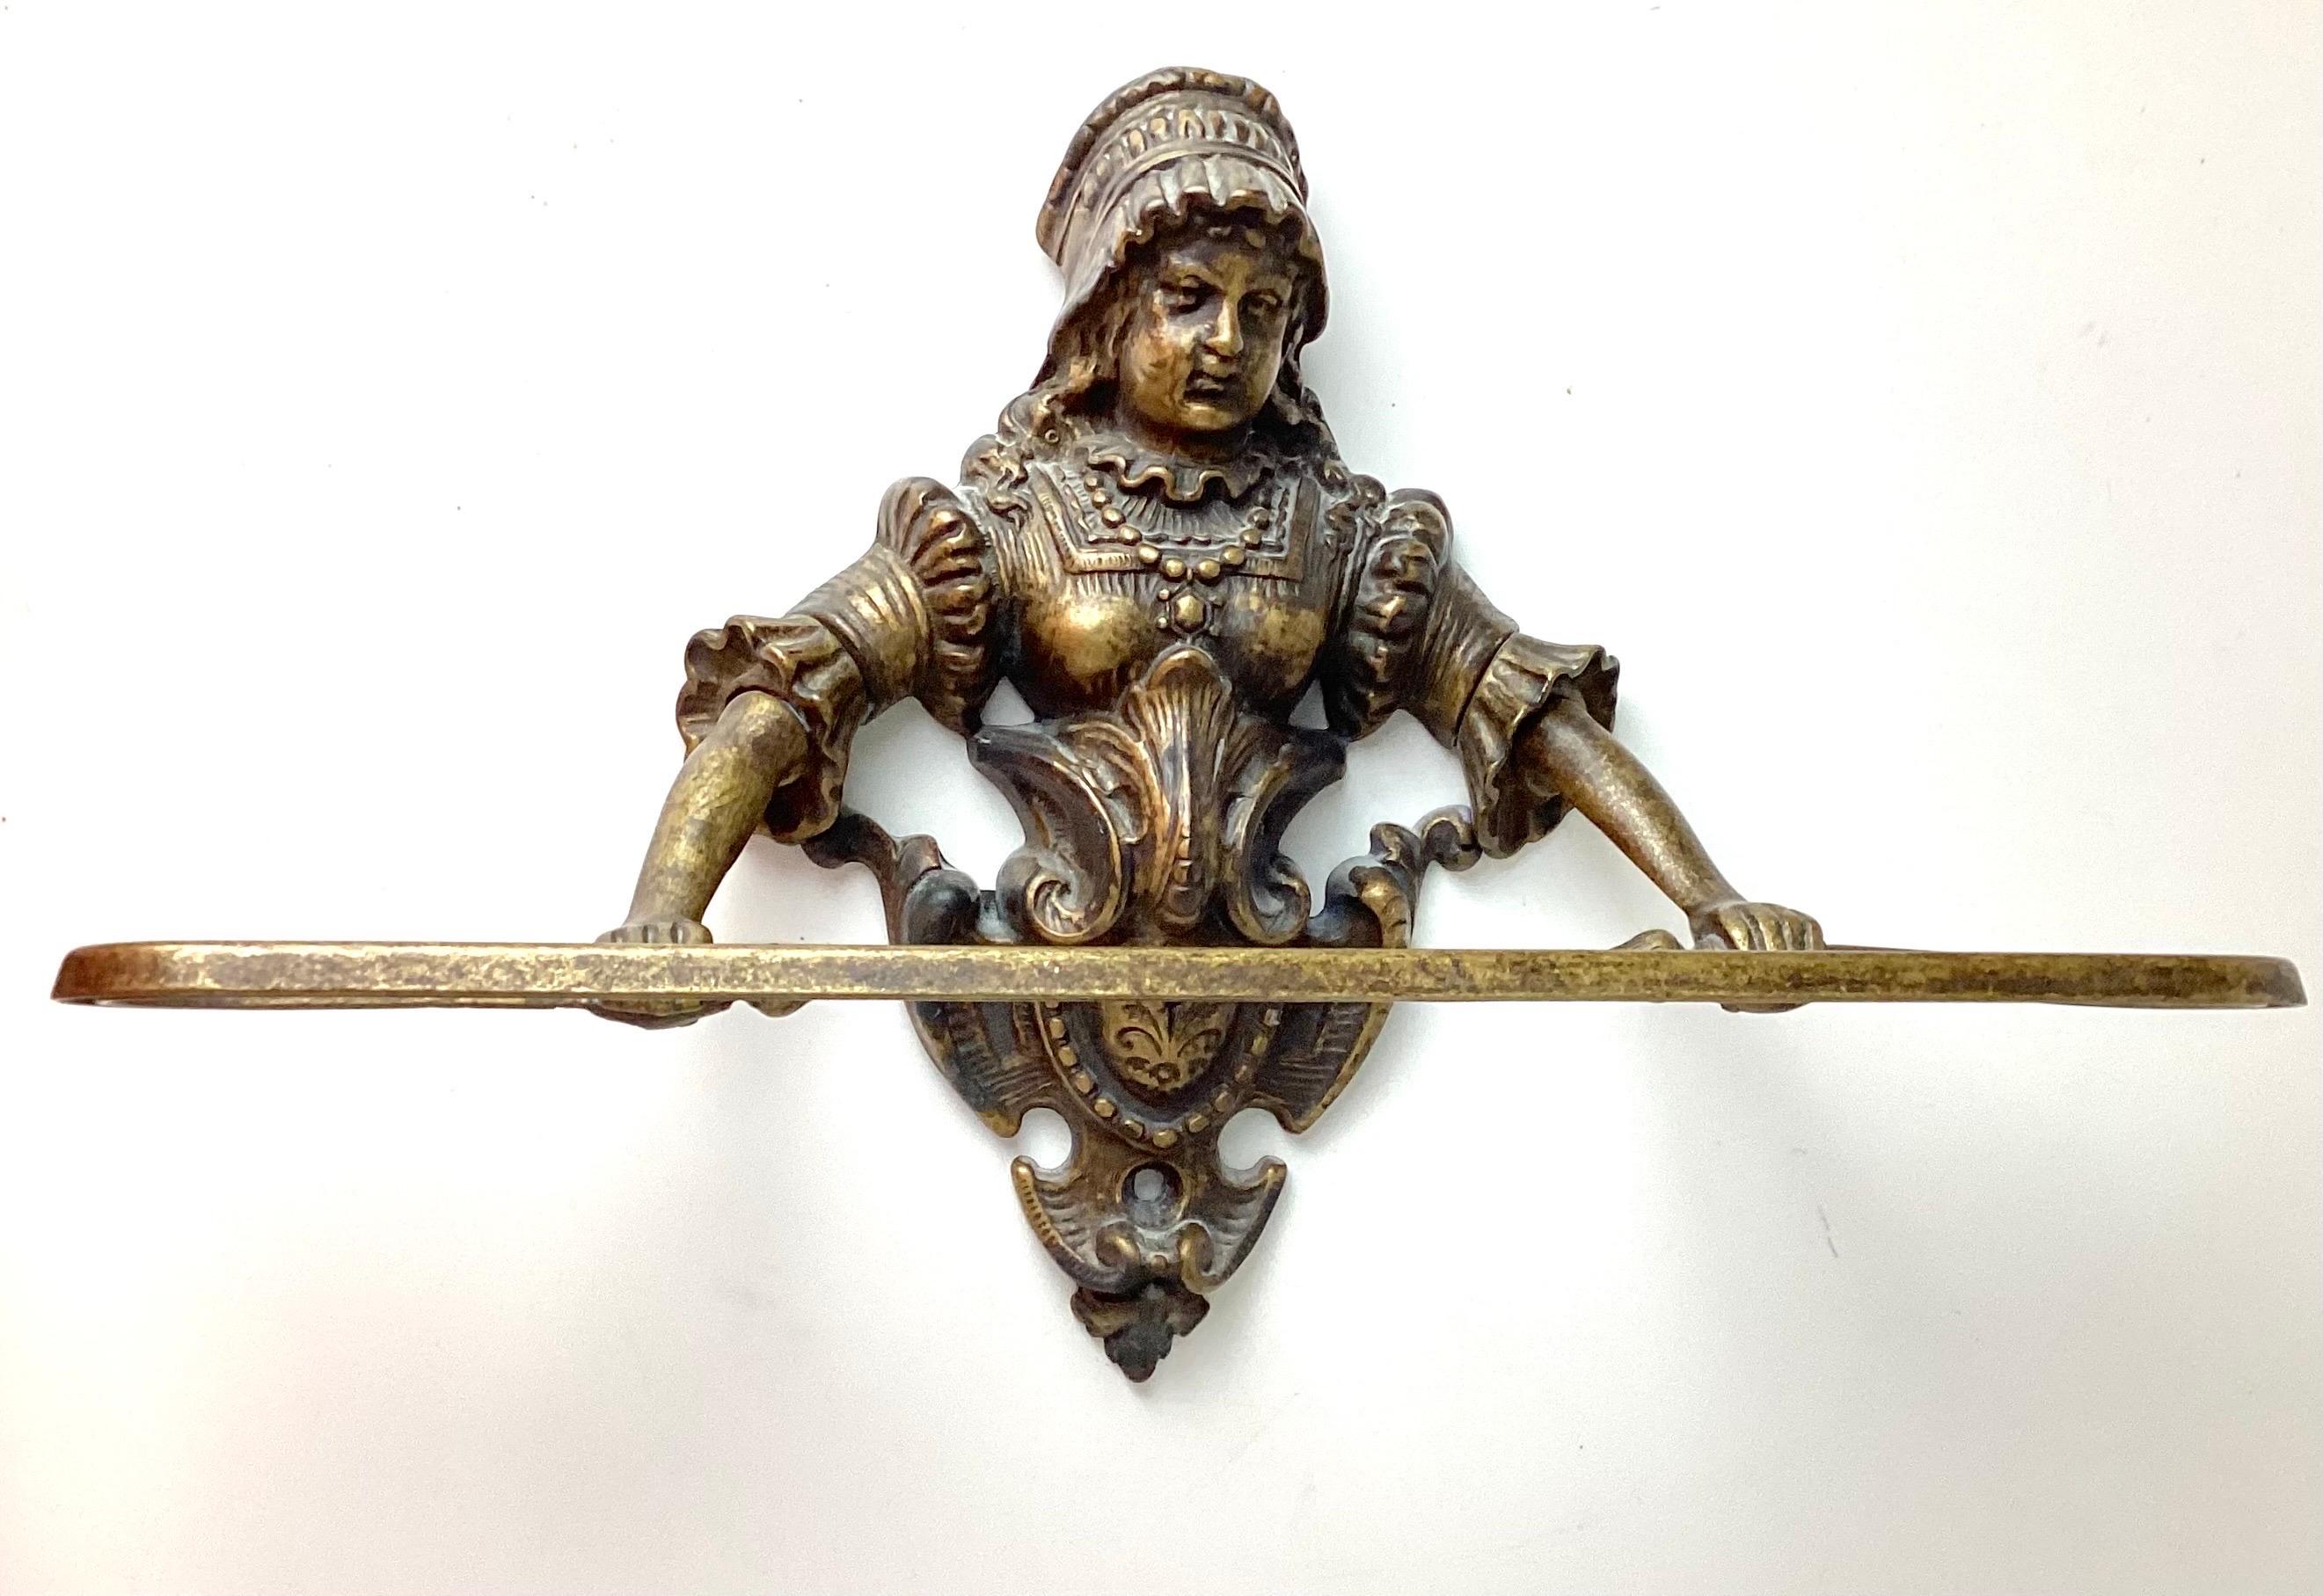 Cast brass figural wall mount kitchen or bathroom towel holder. The charming Victorian antique depicting a lovely woman (possibly milkmaid) in period dress above a brass crest, with a towel bar affixed to the woman’s hands. She is developing an